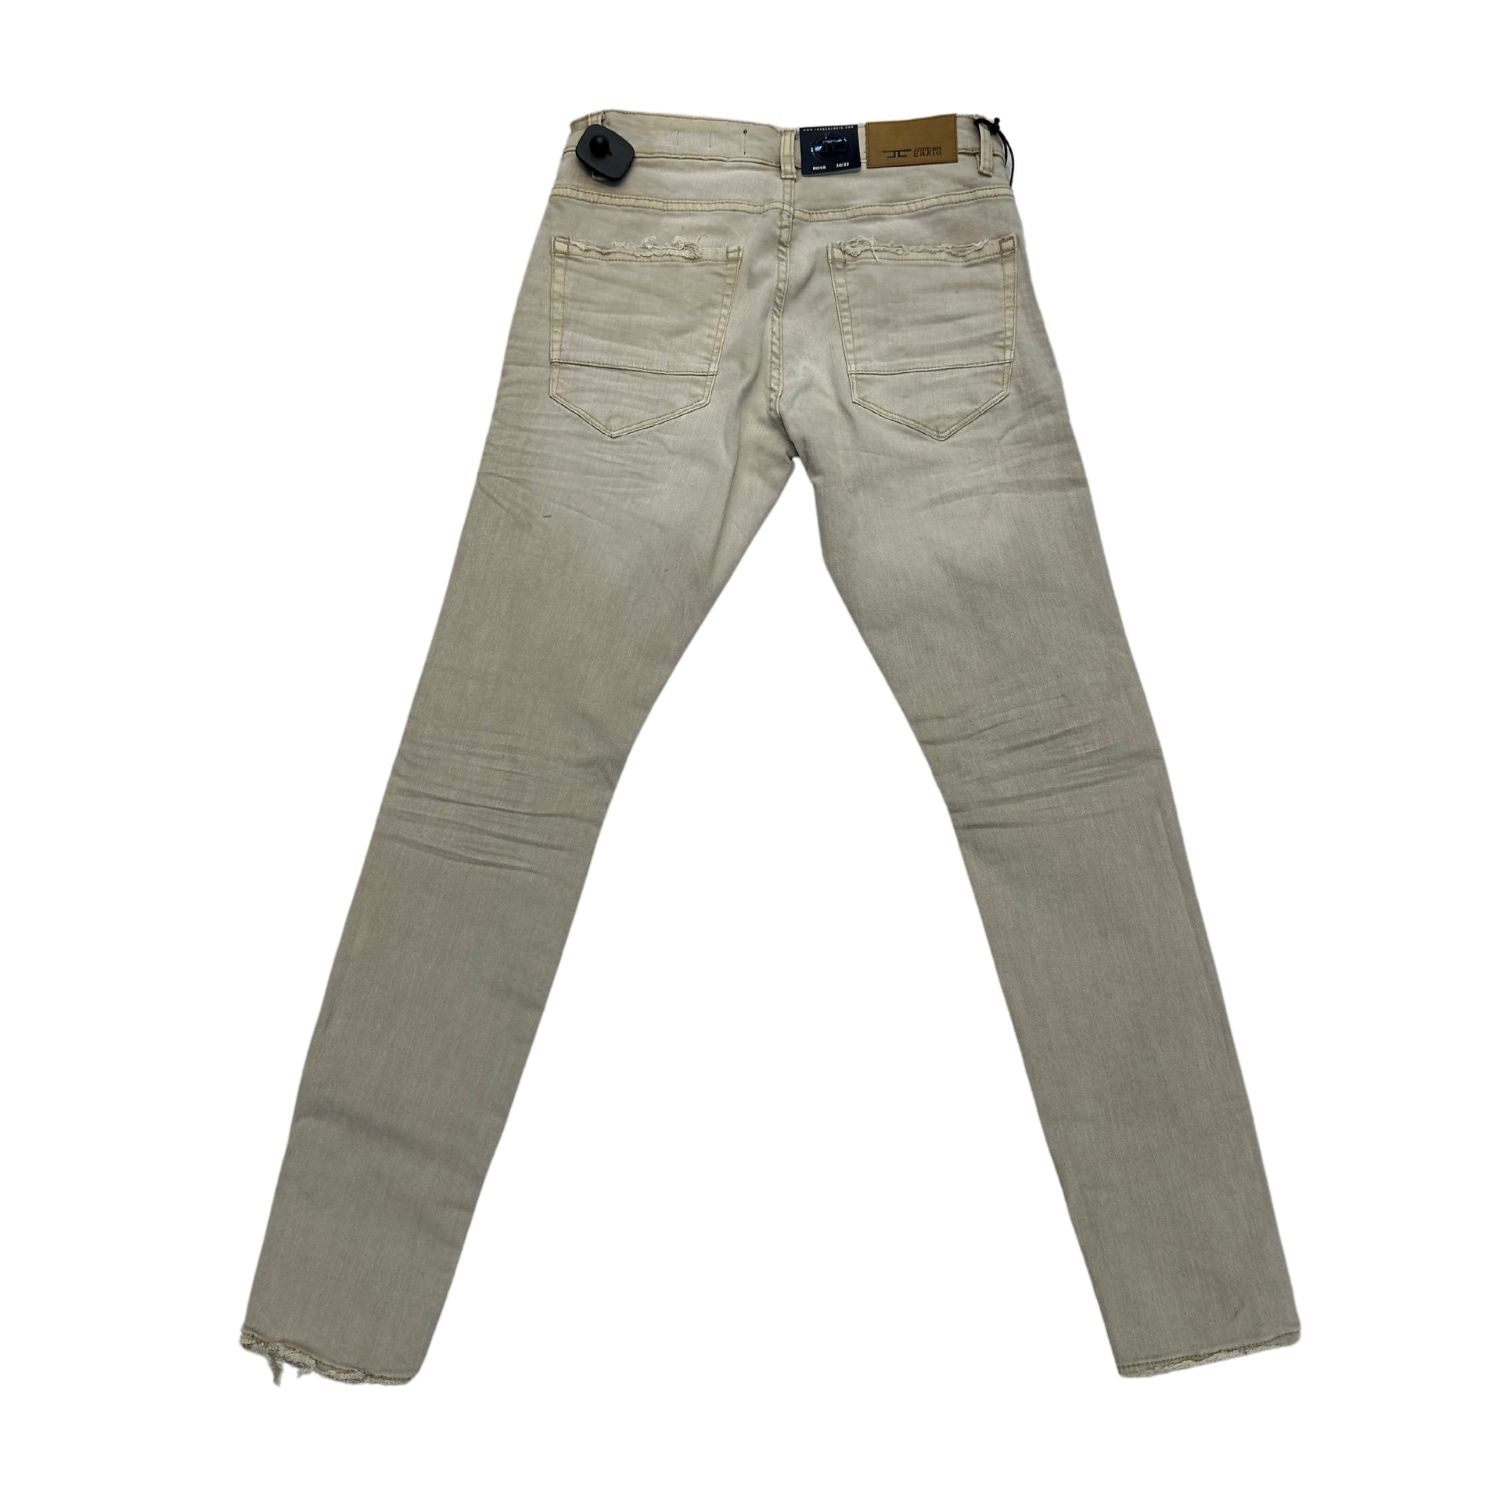 Jordan Craig Ross Fit With Shreds Jeans Mens Style : Jr9502r